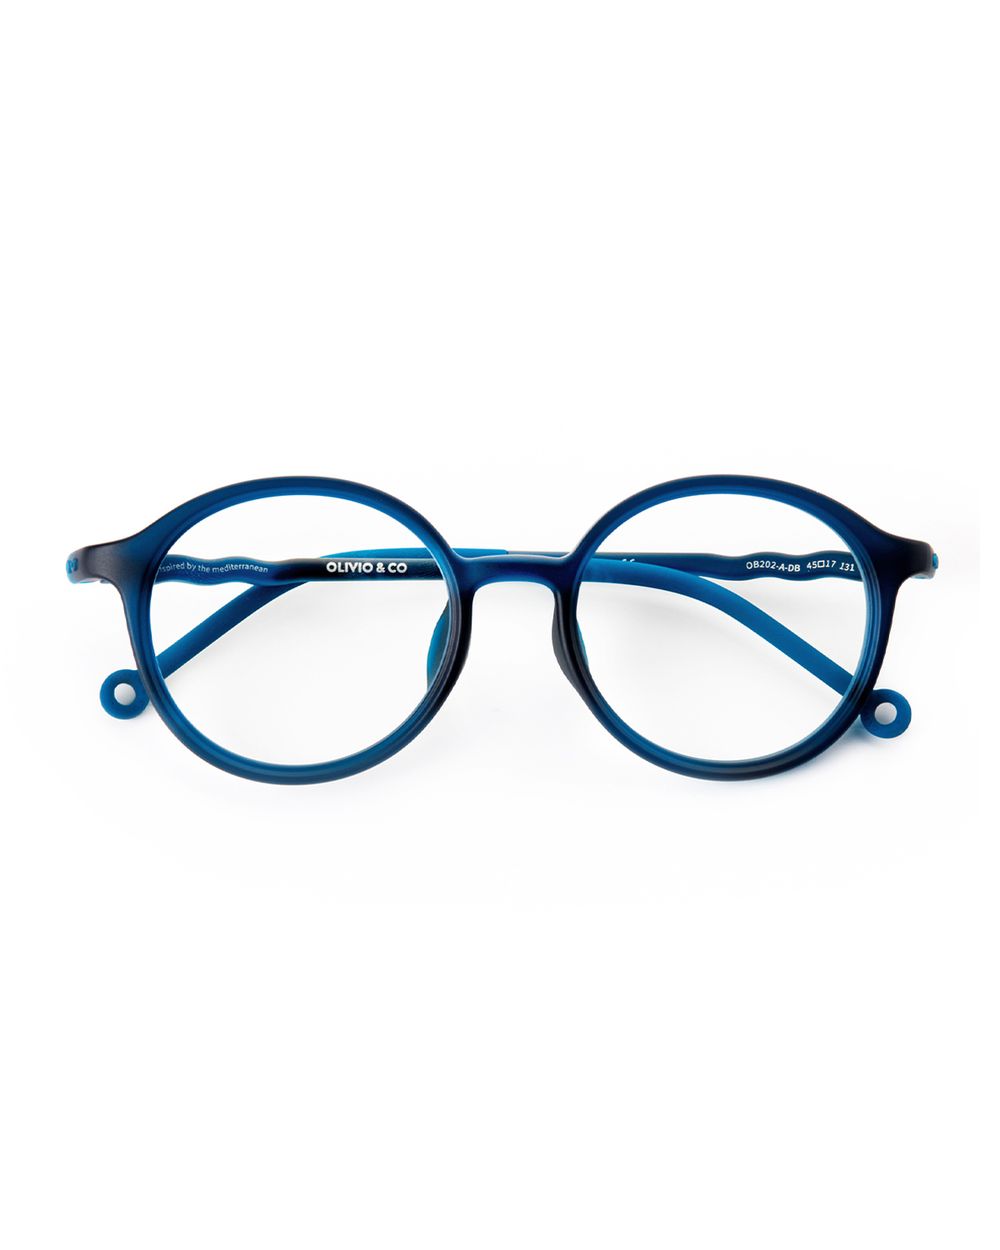 Adult Oval Screen Glasses Starry Blue